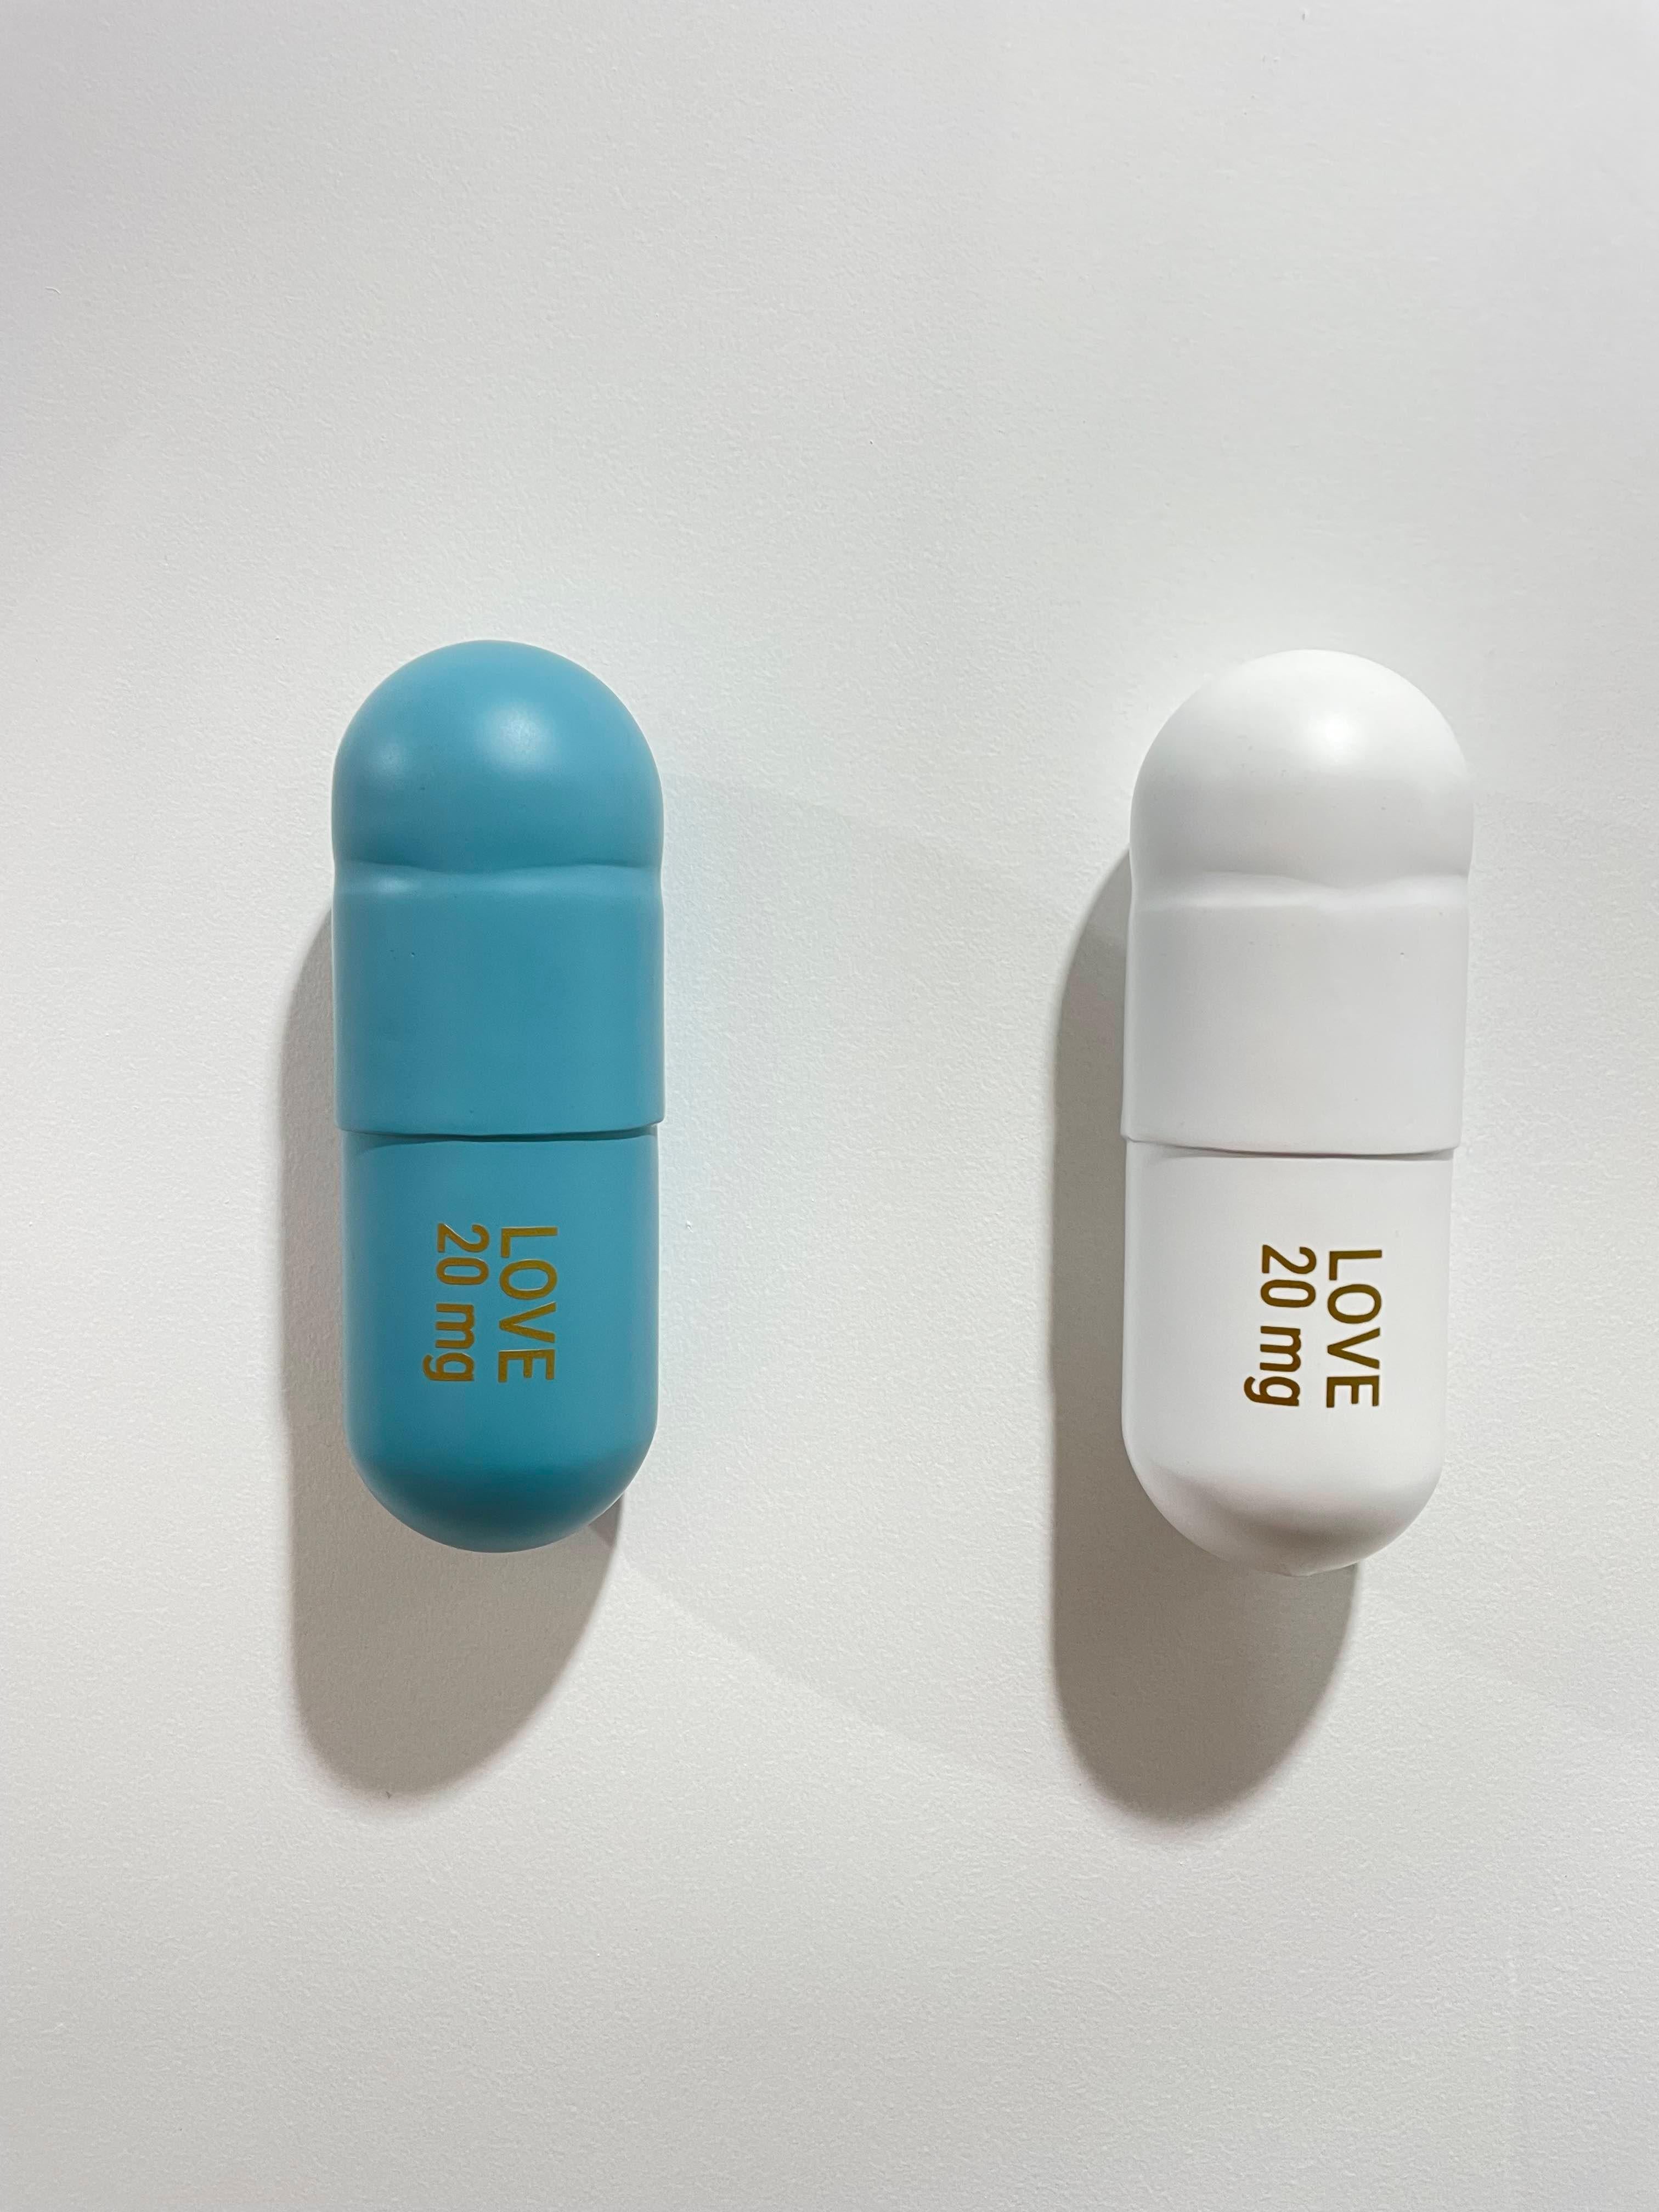 Tal Nehoray Still-Life Sculpture - 20 ML Love pill Combo (matte turquoise and white) - figurative sculpture